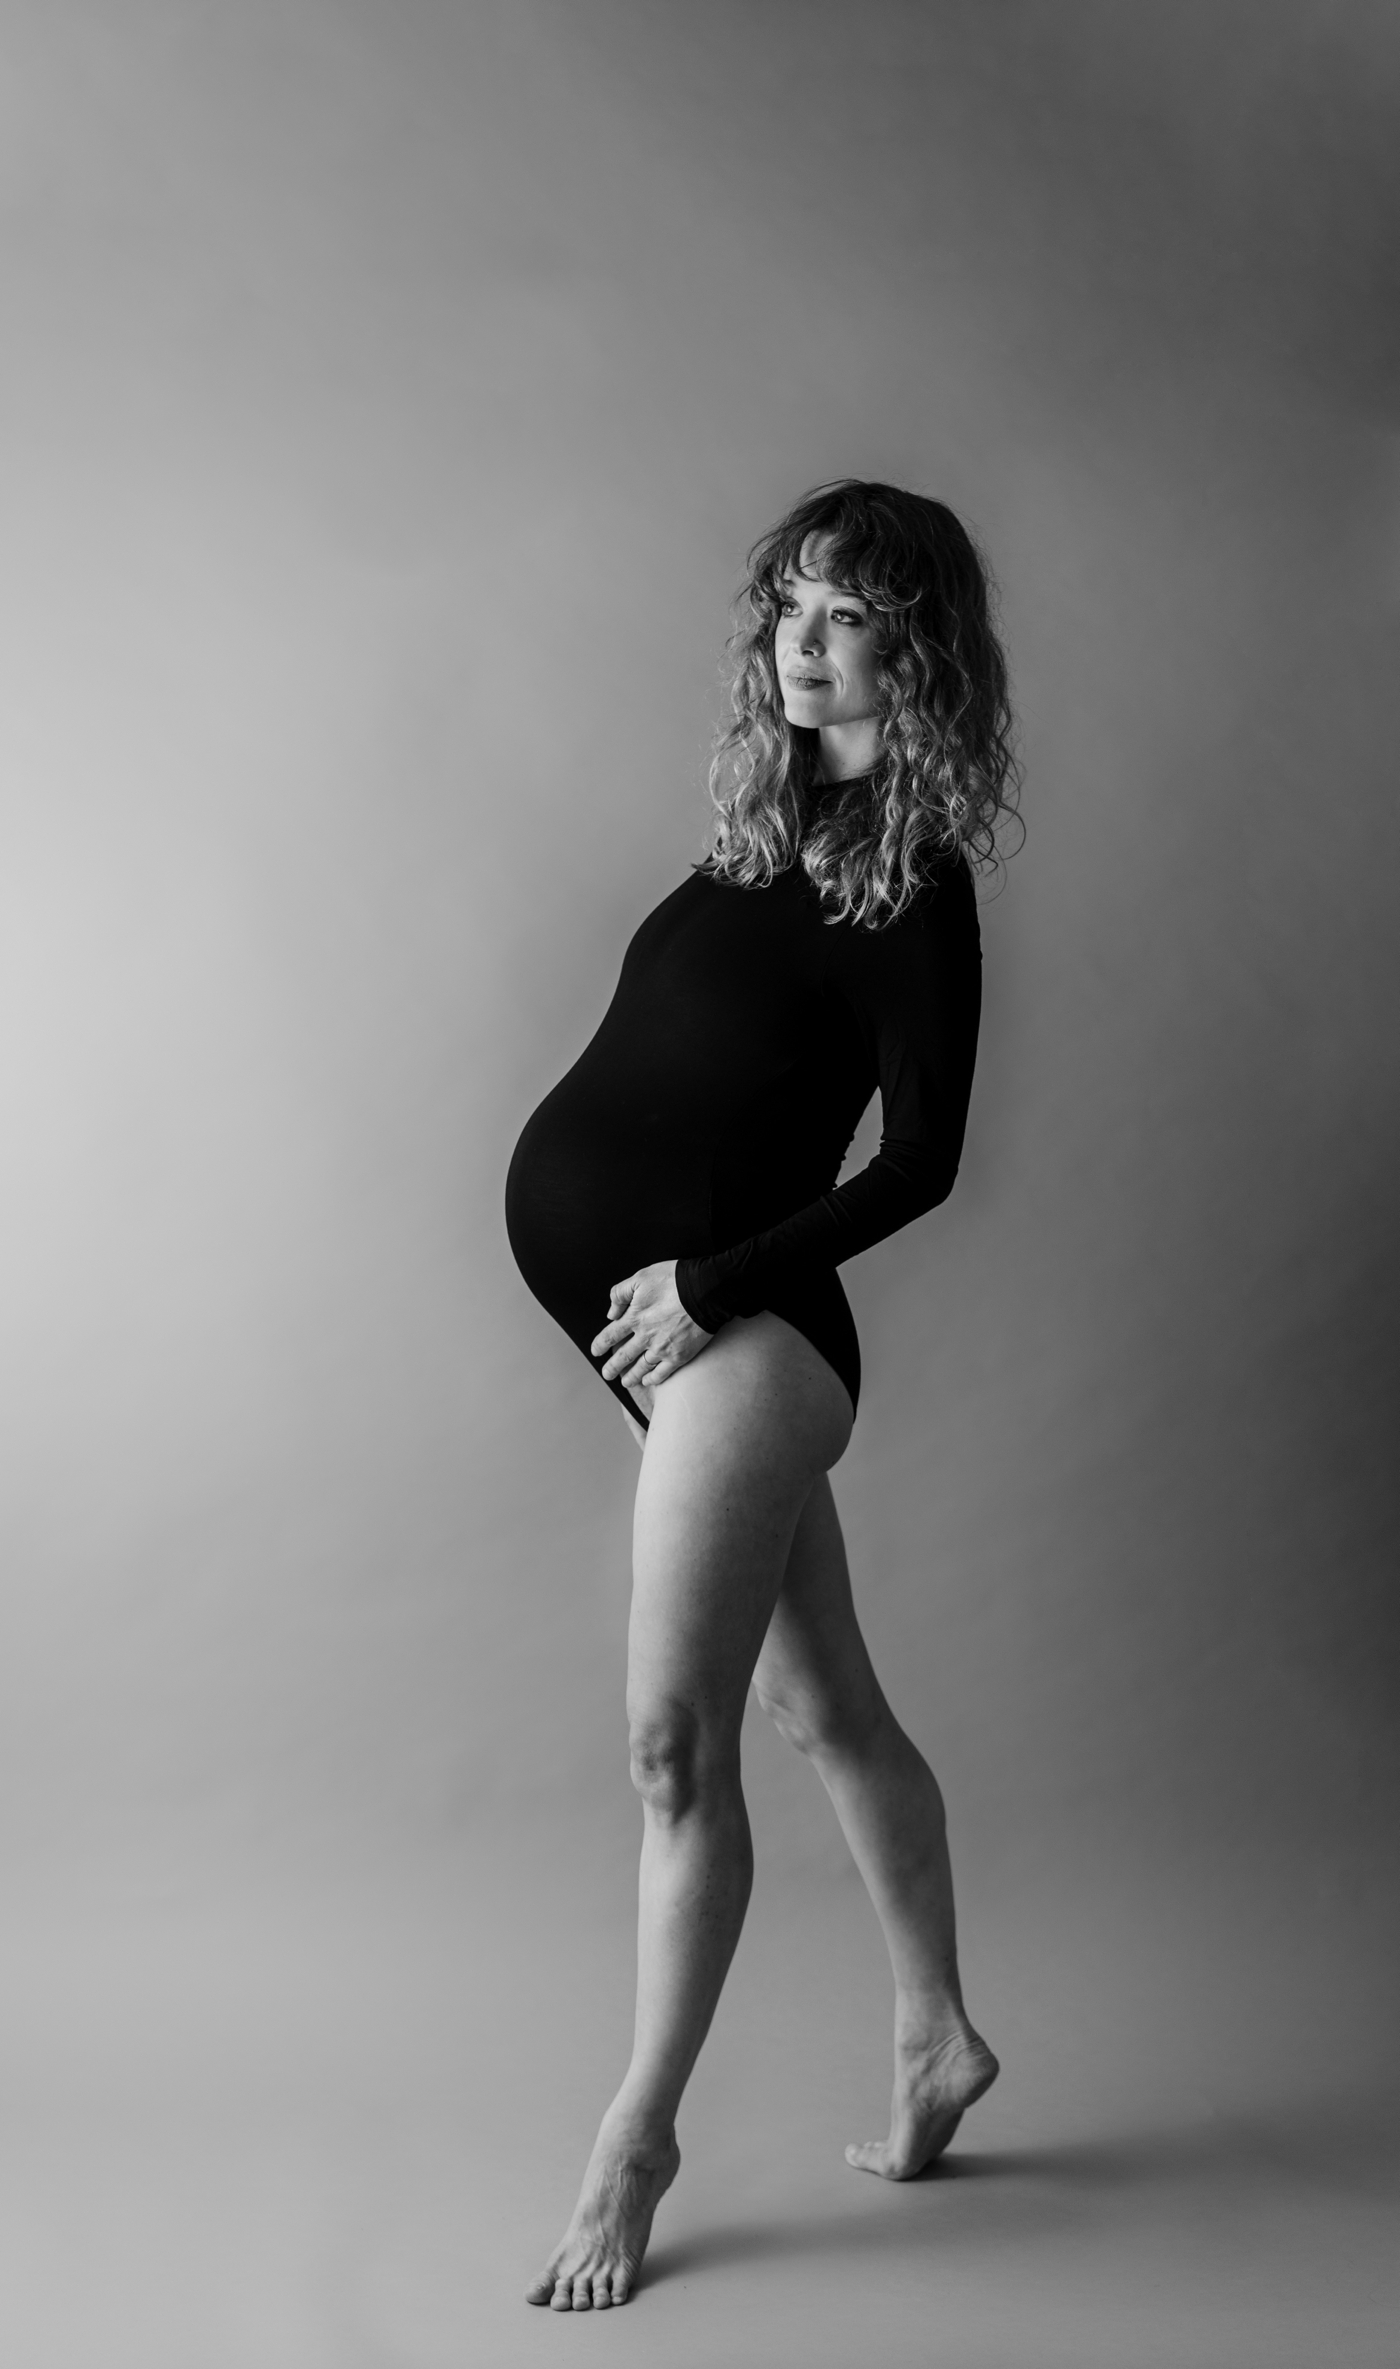 Black and white image of mom during dancer-inspired studio Maternity Session. Photo by Lauren Sosler Photography.